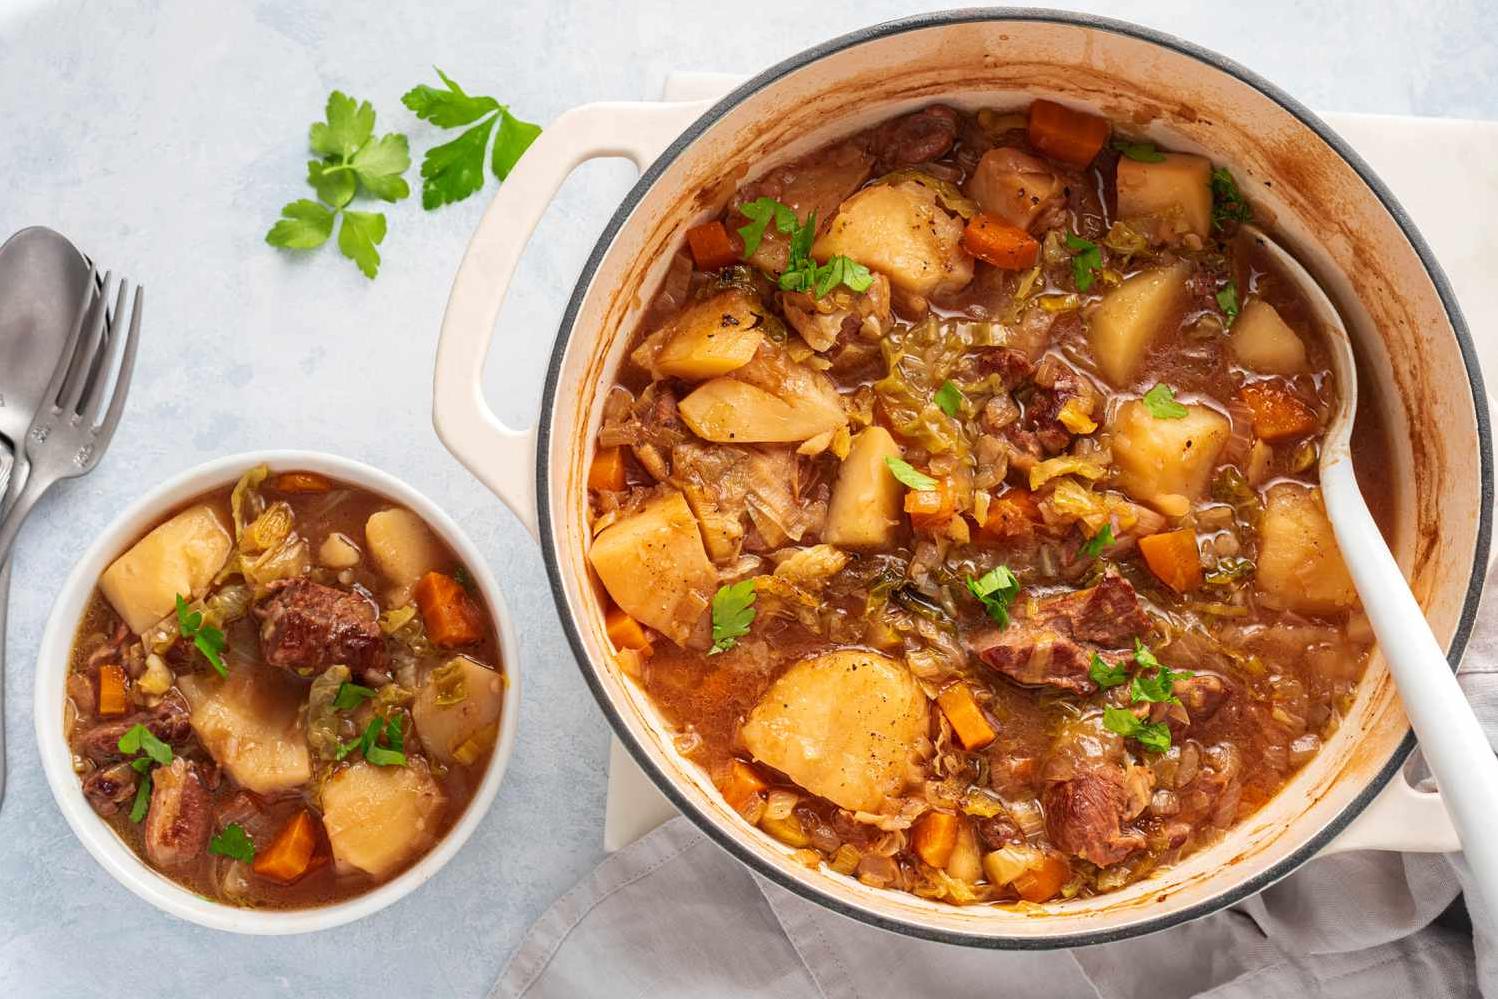  A hearty Irish classic that will warm your soul and fill your belly.